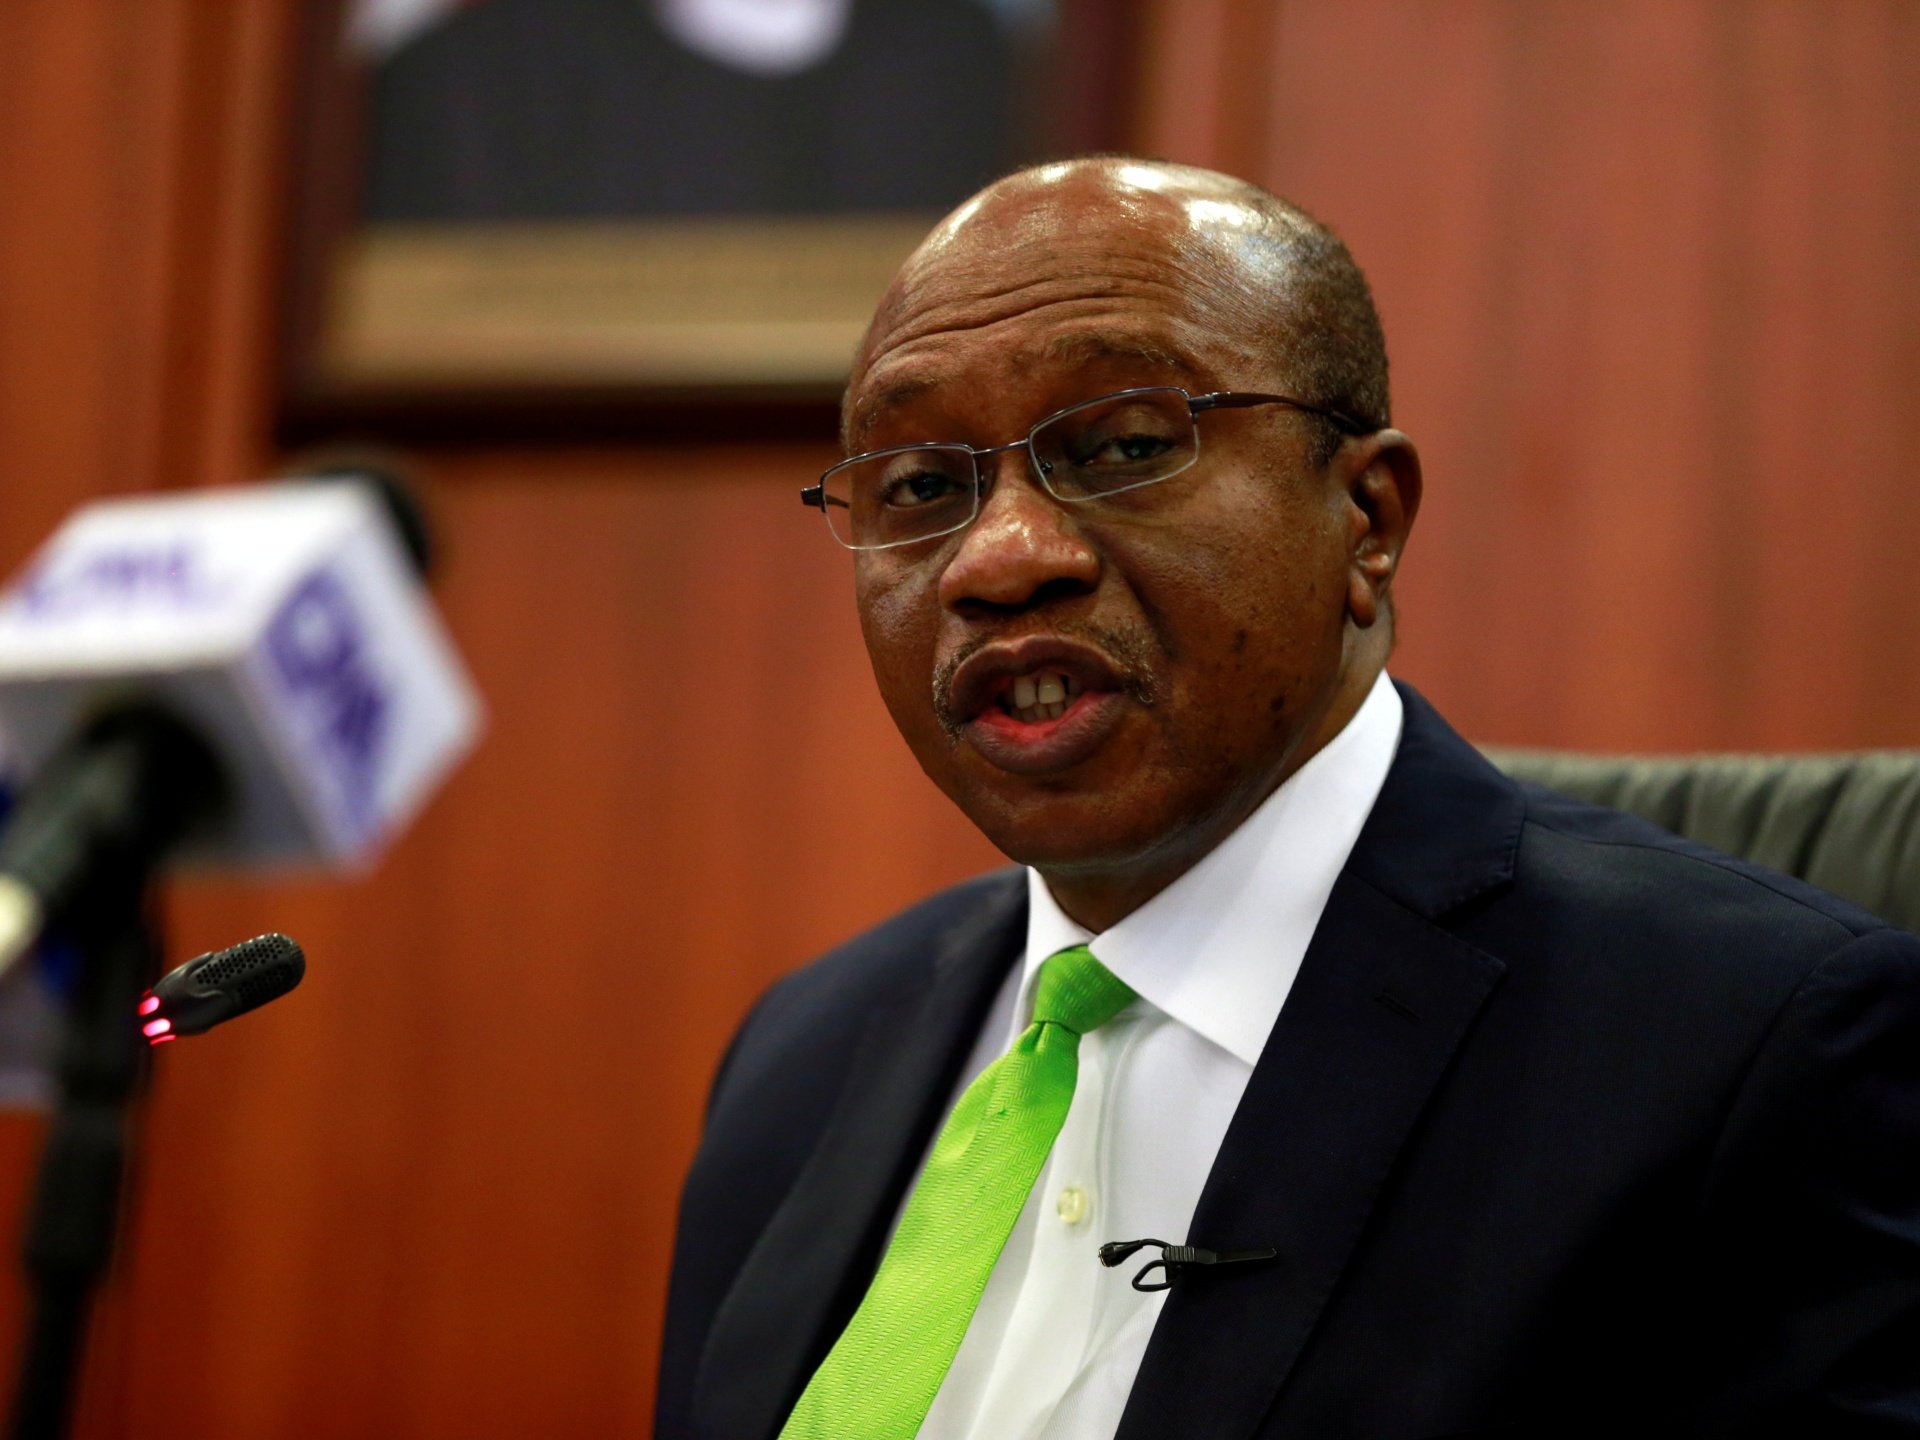 Court orders DSS to immediately allow Emefiele have access to lawyers, family